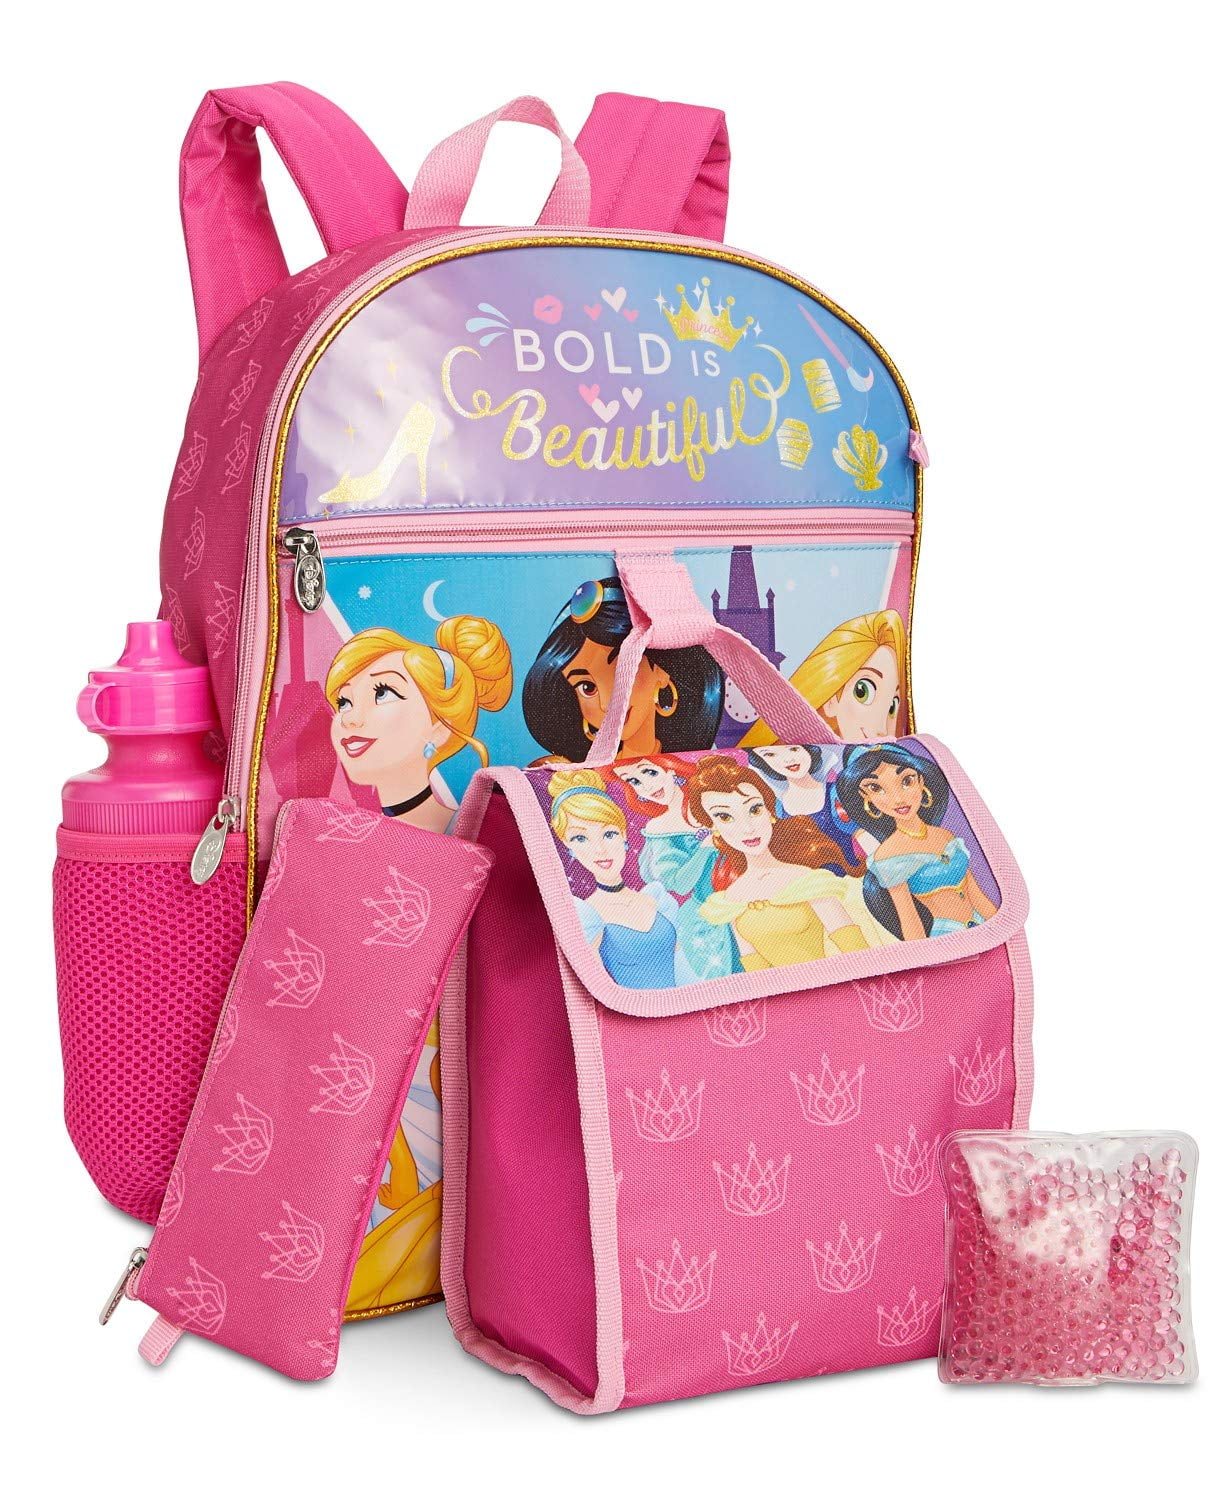 KidPlay Products Disney Princess Backpack Set Utility Pouch Lunch Bag Water Bottle